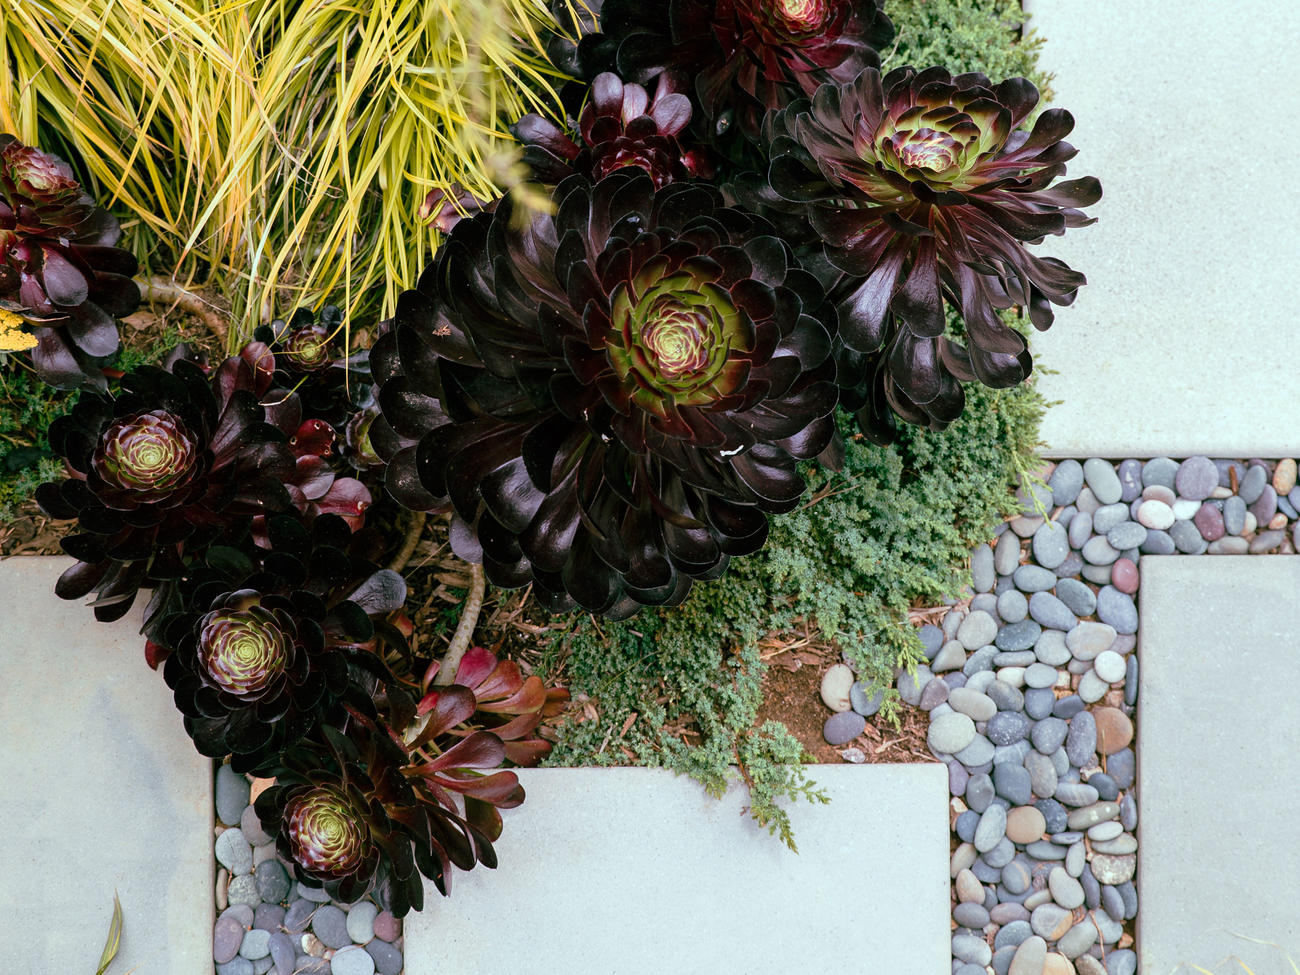 From Fire to Water, These Are the Top 5 Garden Trends We’re Watching for 2020